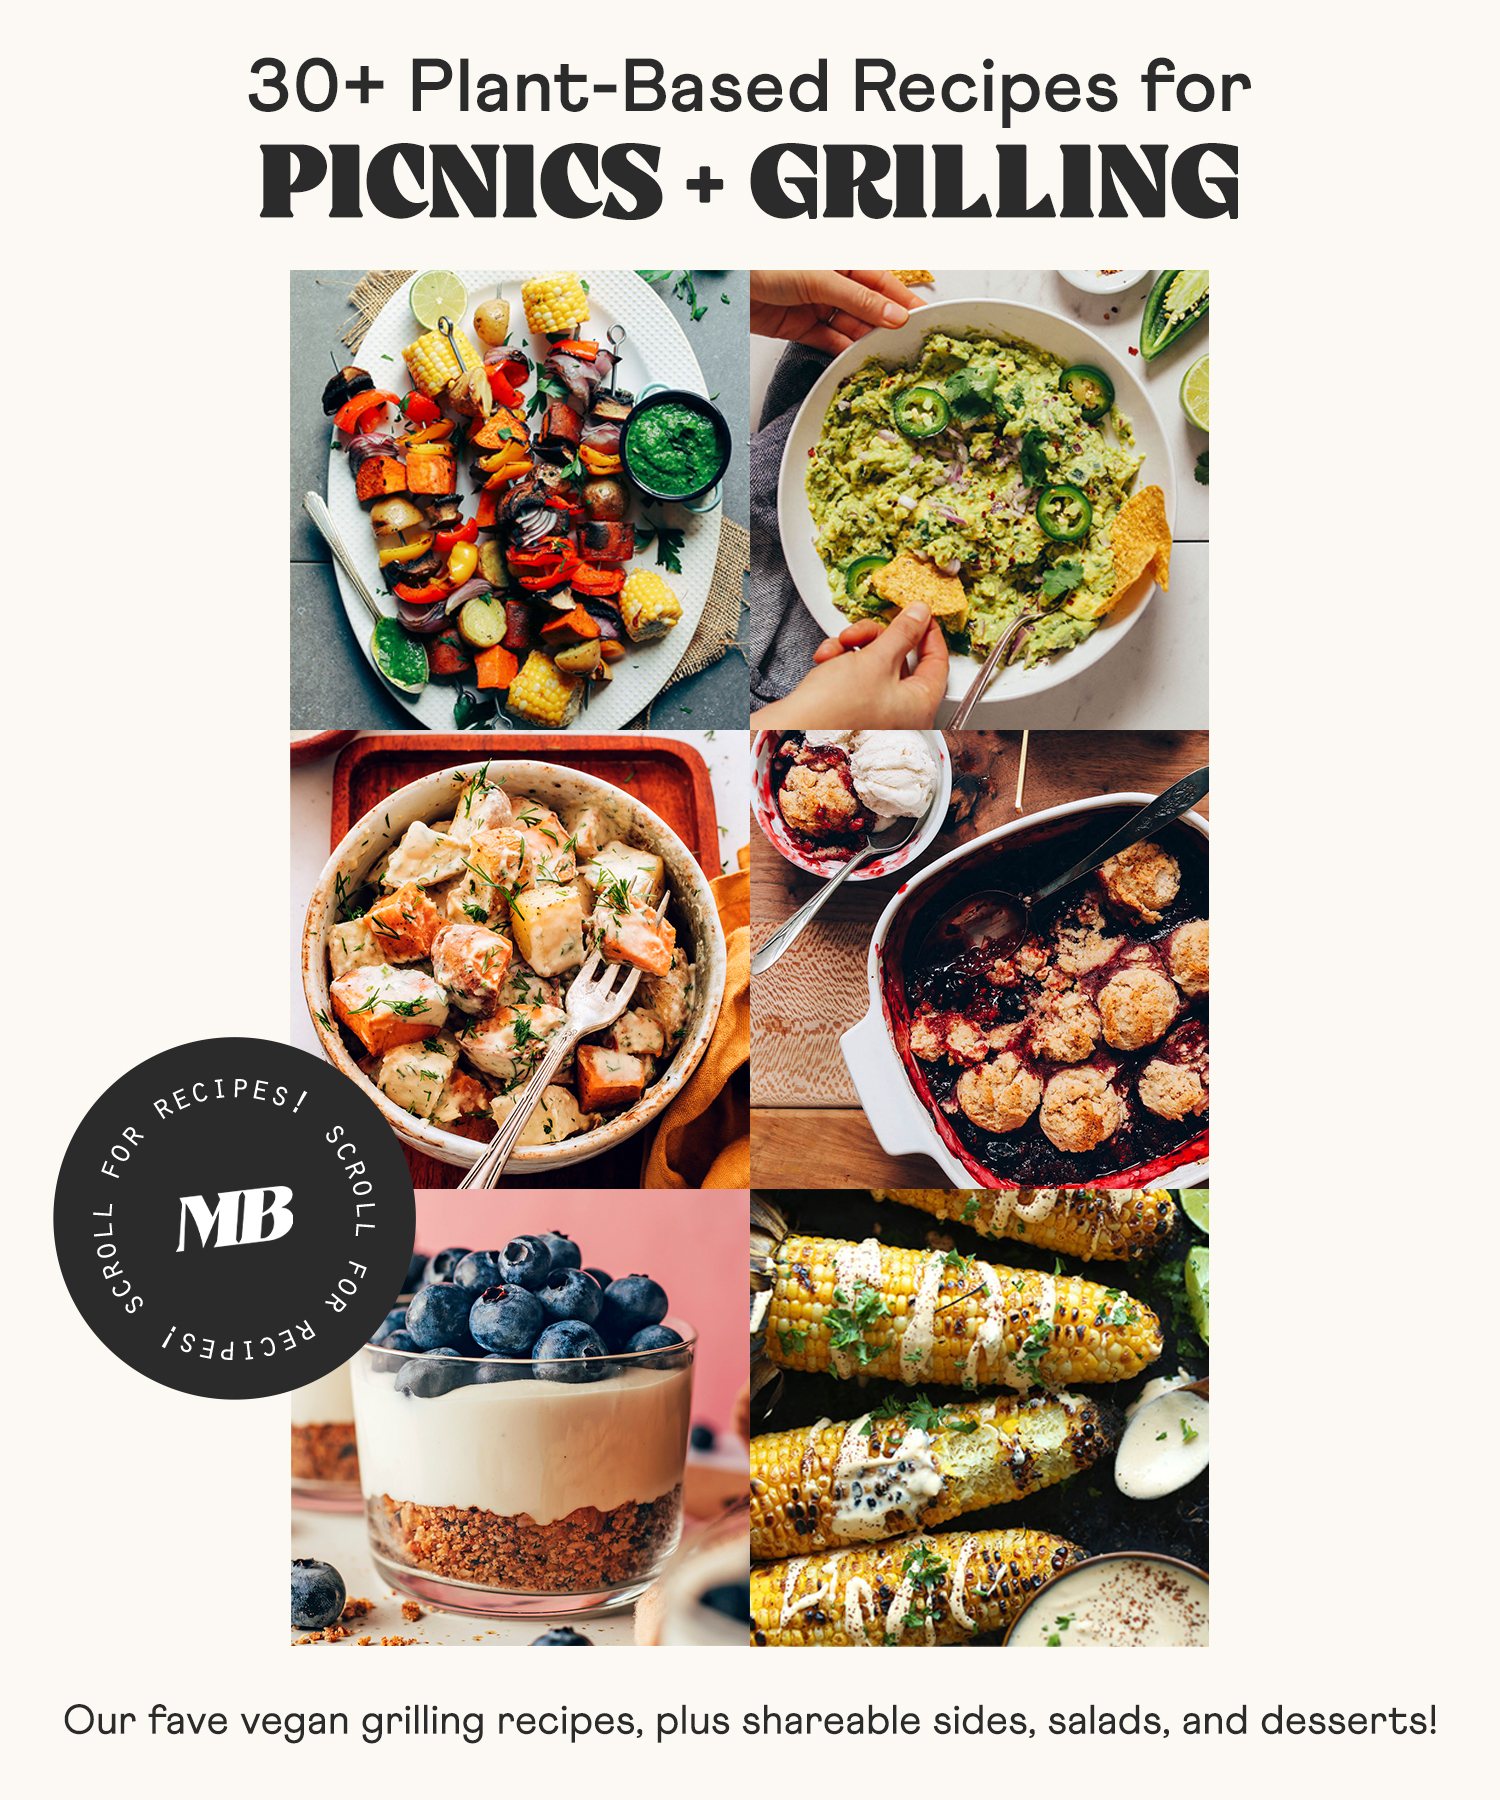 Image of plant-based recipes for picnics and grilling